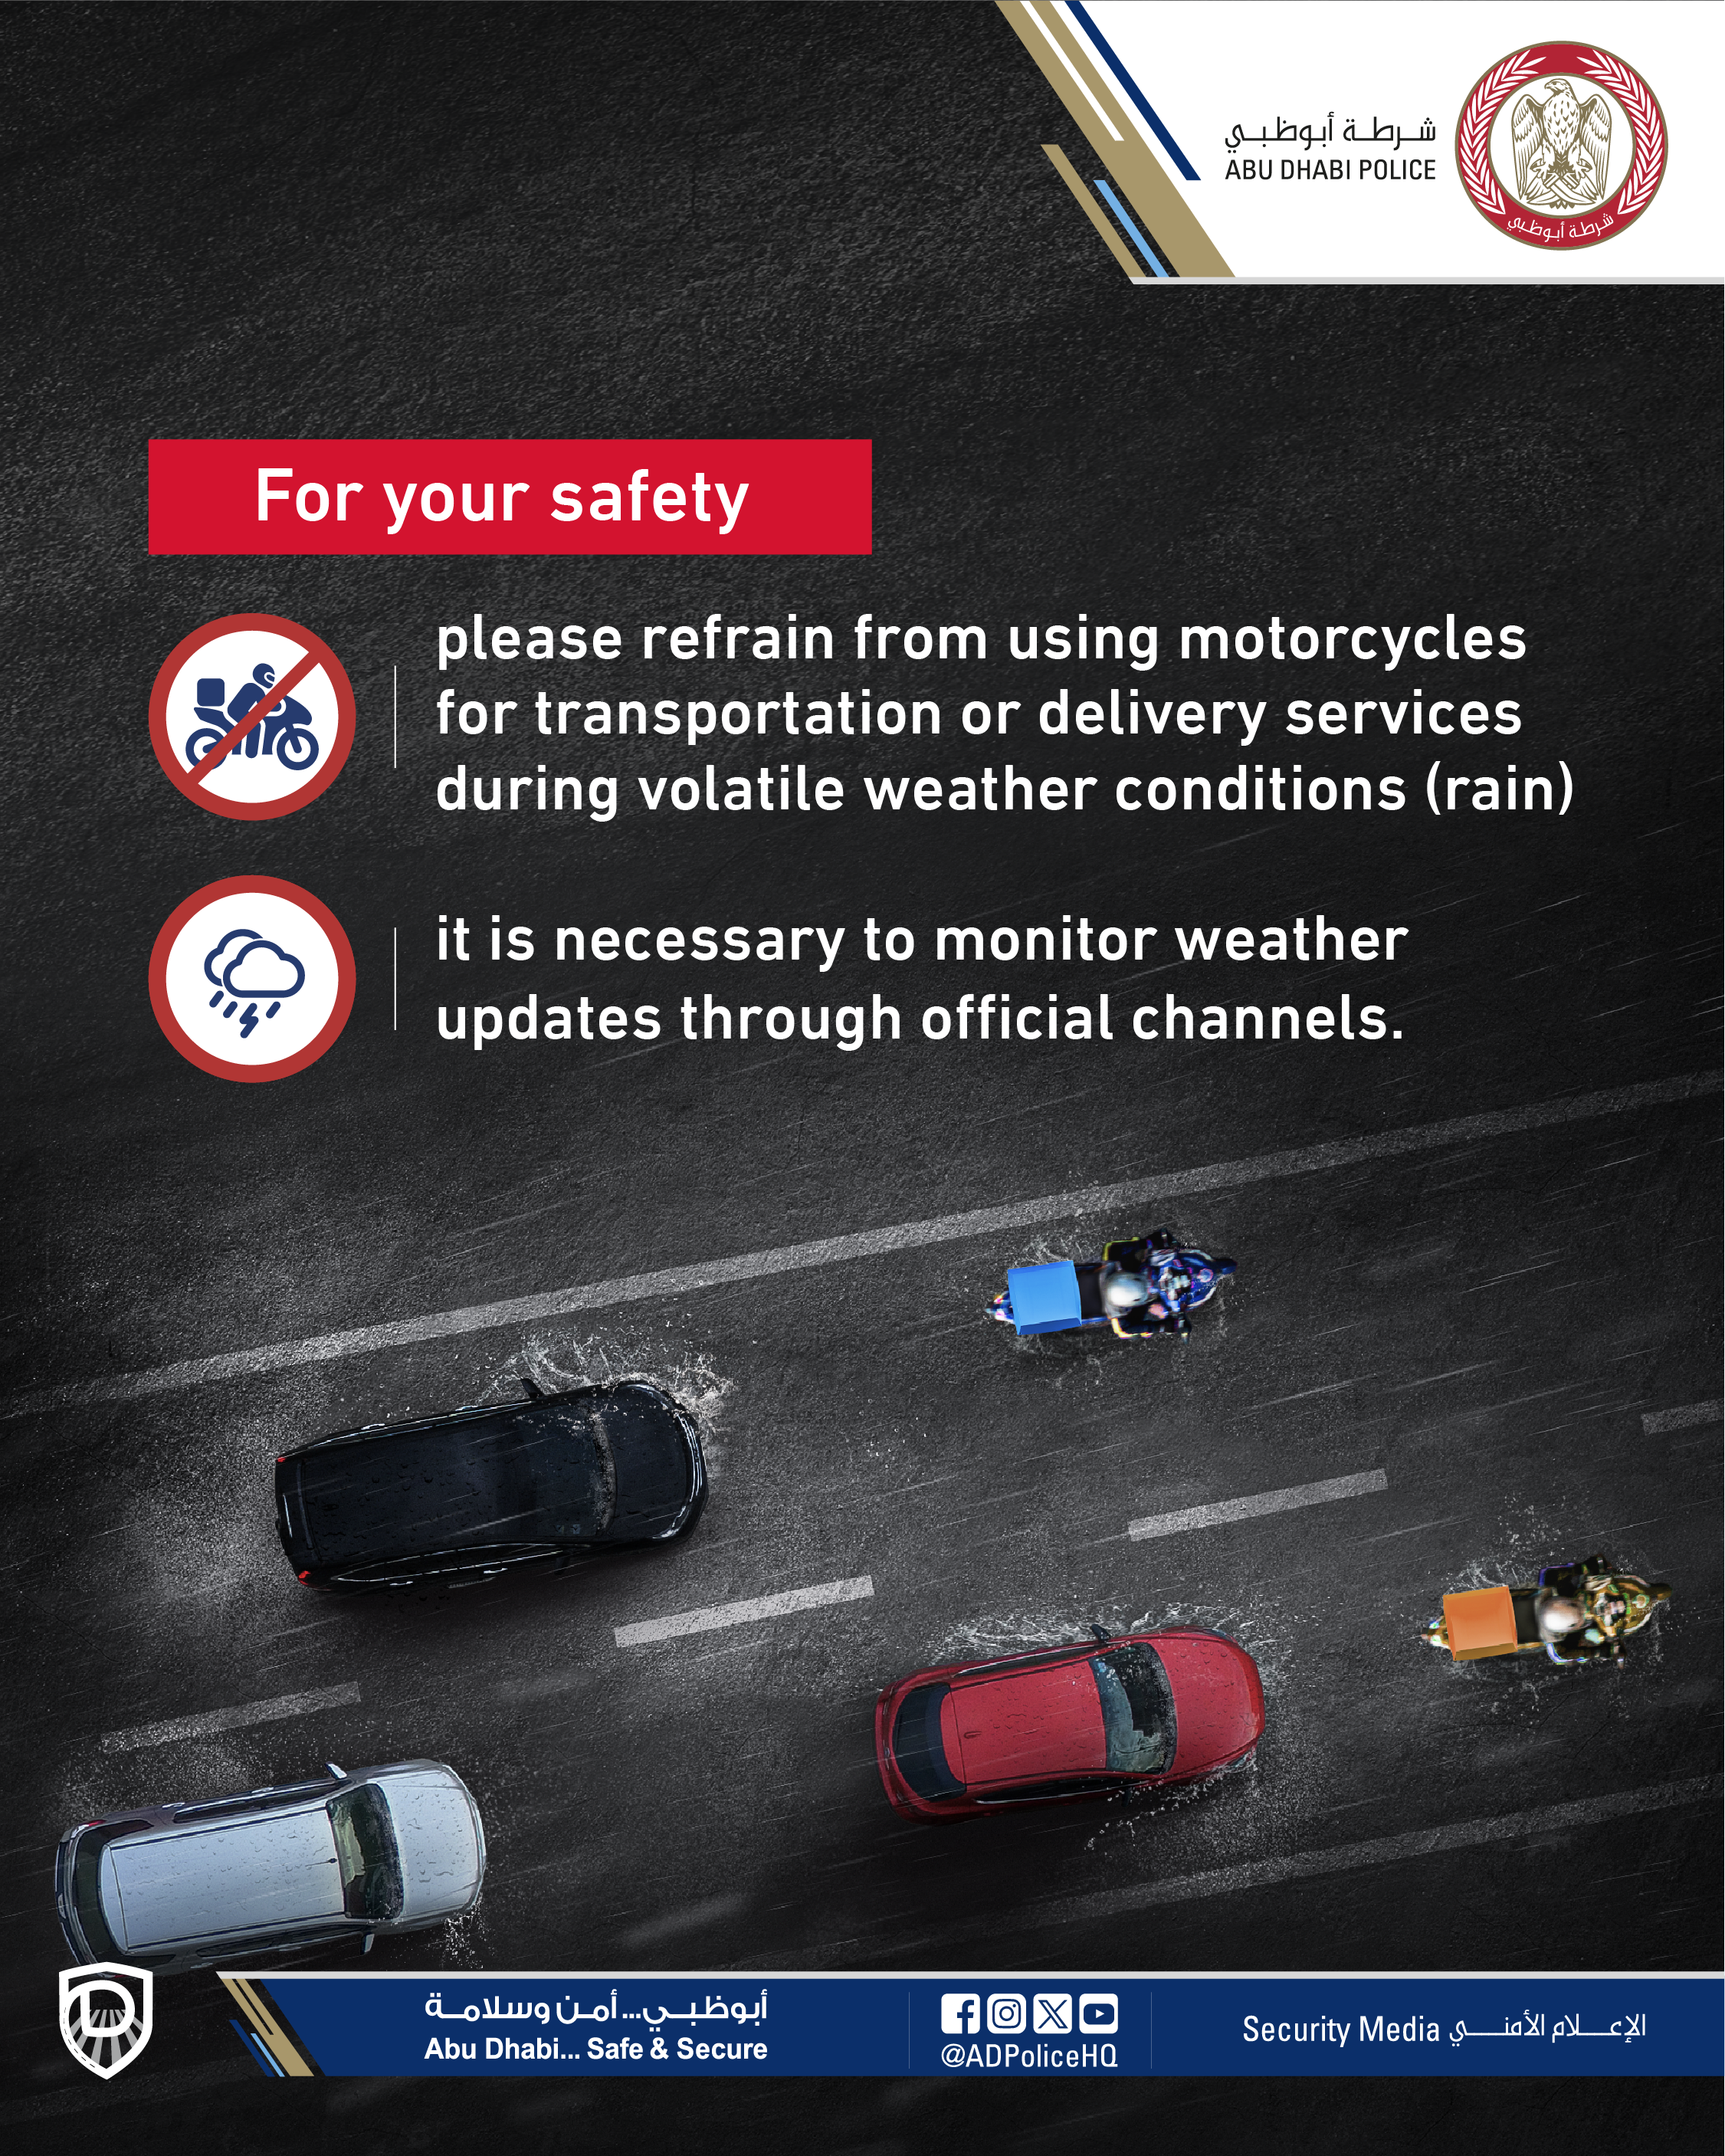 Photo: Abu Dhabi Police urges delivery riders to avoid driving in unstable weather conditions.